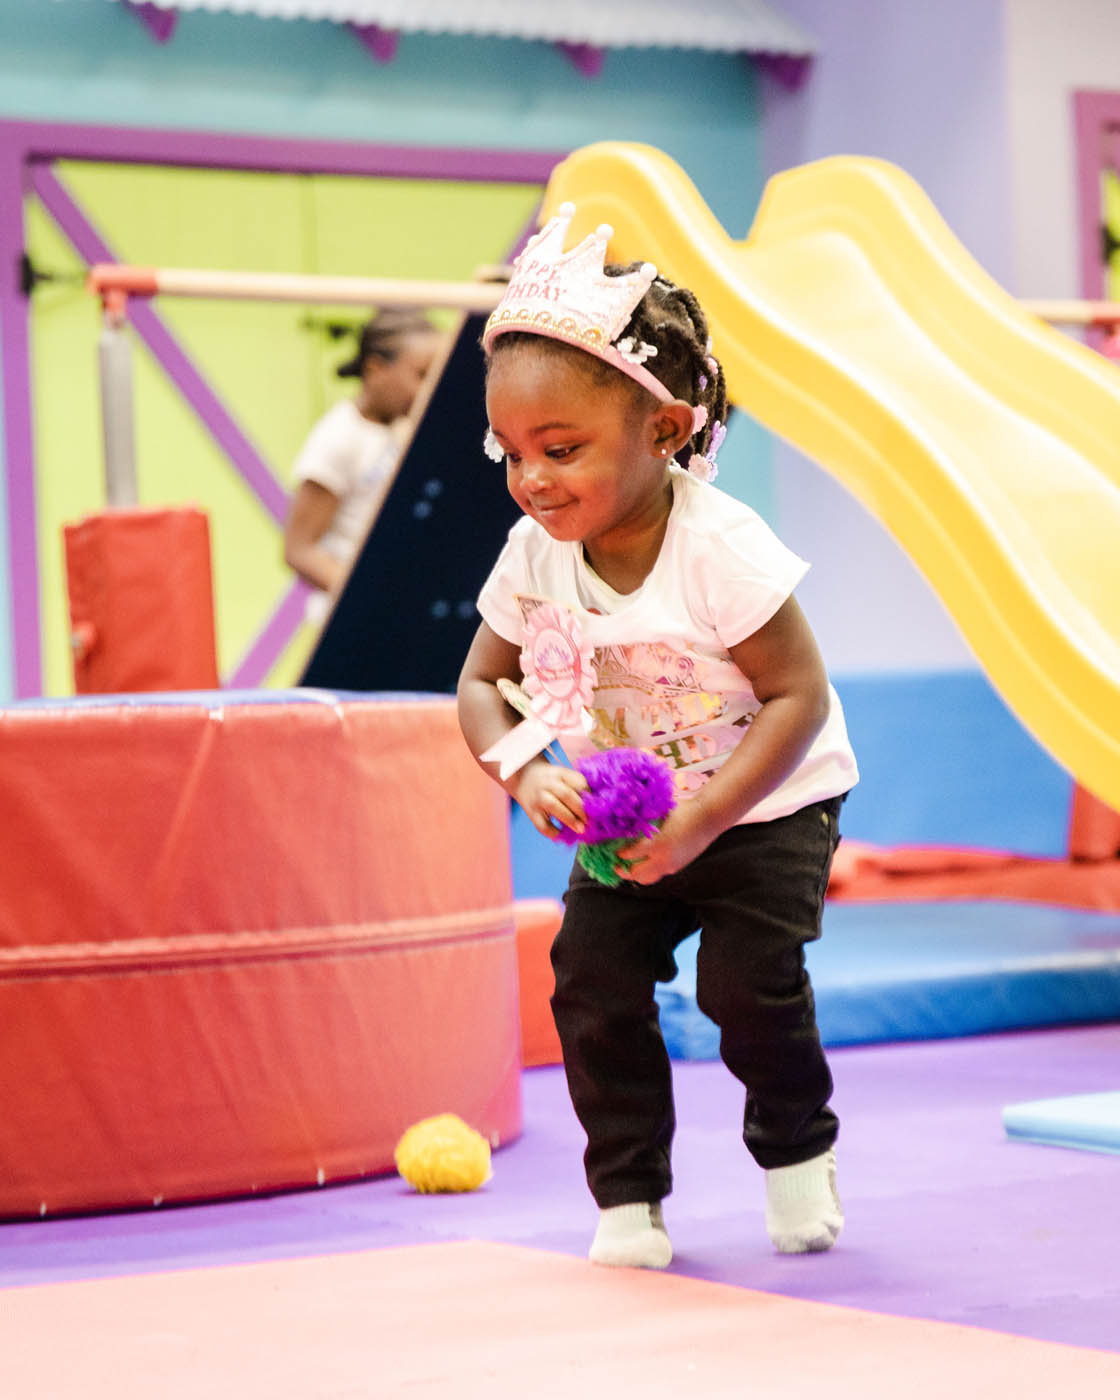 A little girl enjoying her b day party at Romp n' Roll kids birthday party places.